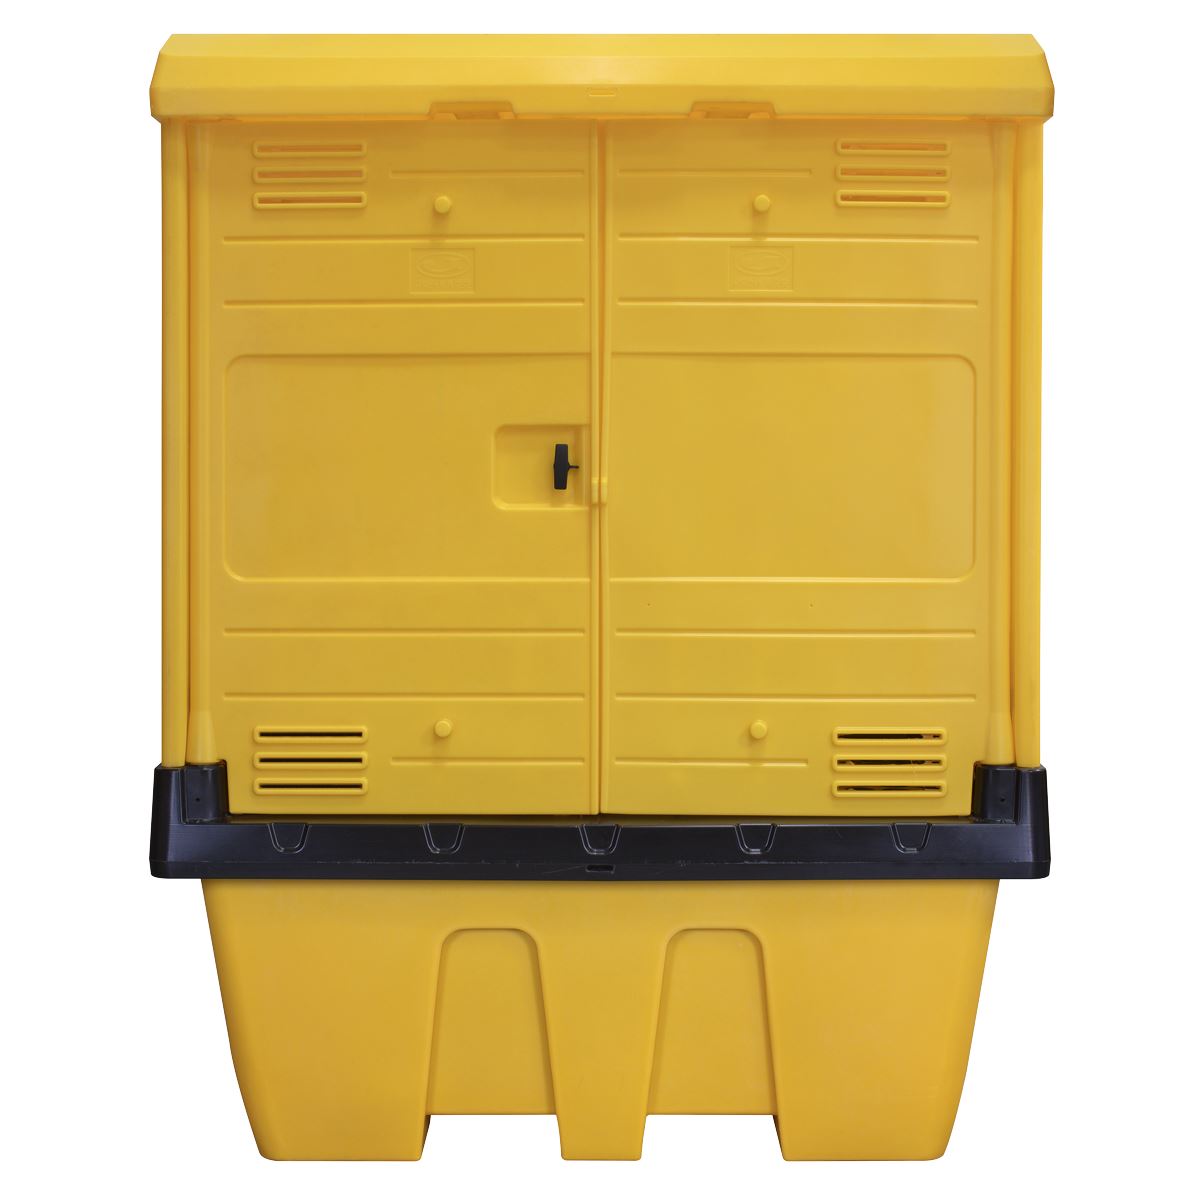 Sealey IBC Spill Pallet With Weathertight Hardcover